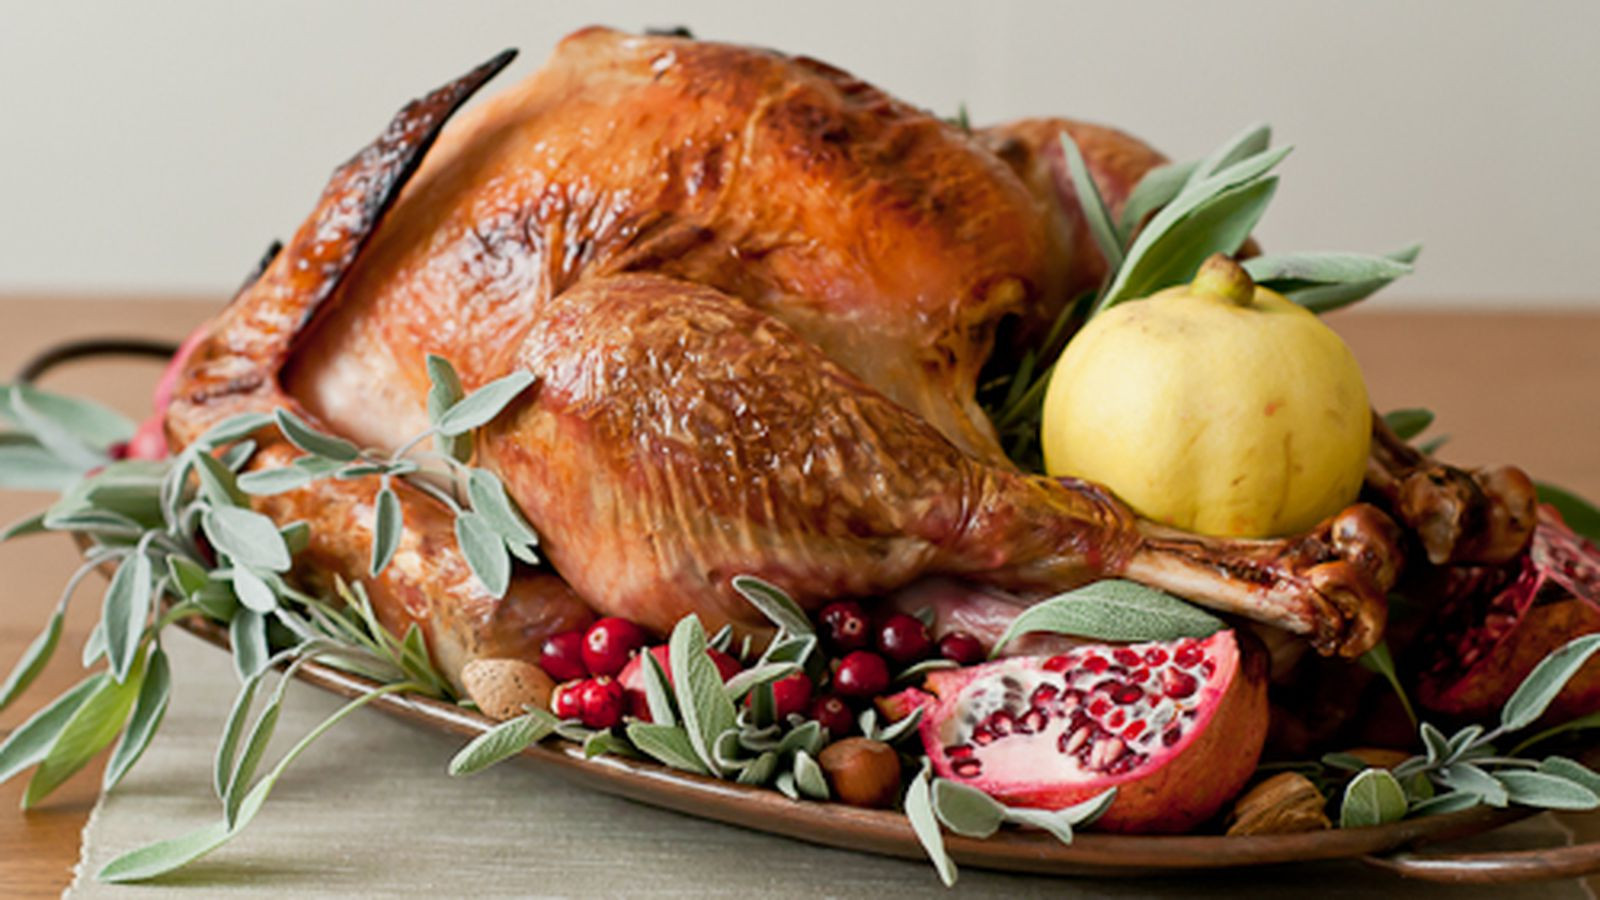 Best Turkey Brands To Buy For Thanksgiving
 20 Places To Enjoy Thanksgiving Dinner In San Diego